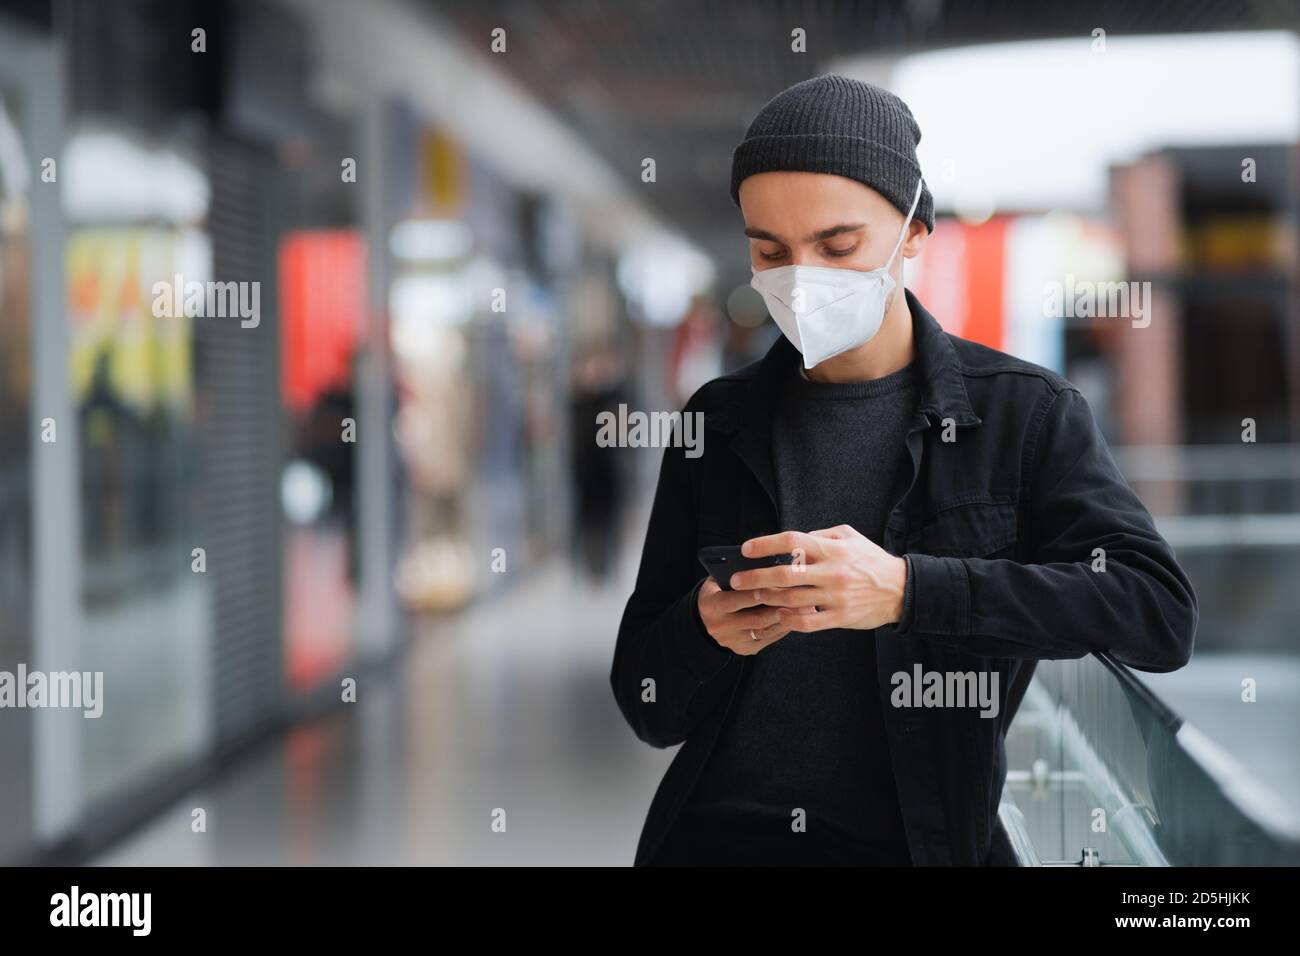 Man in protective mask with cell phone at a shopping centre or underground. Living in pandemic world, urban scene Stock Photo